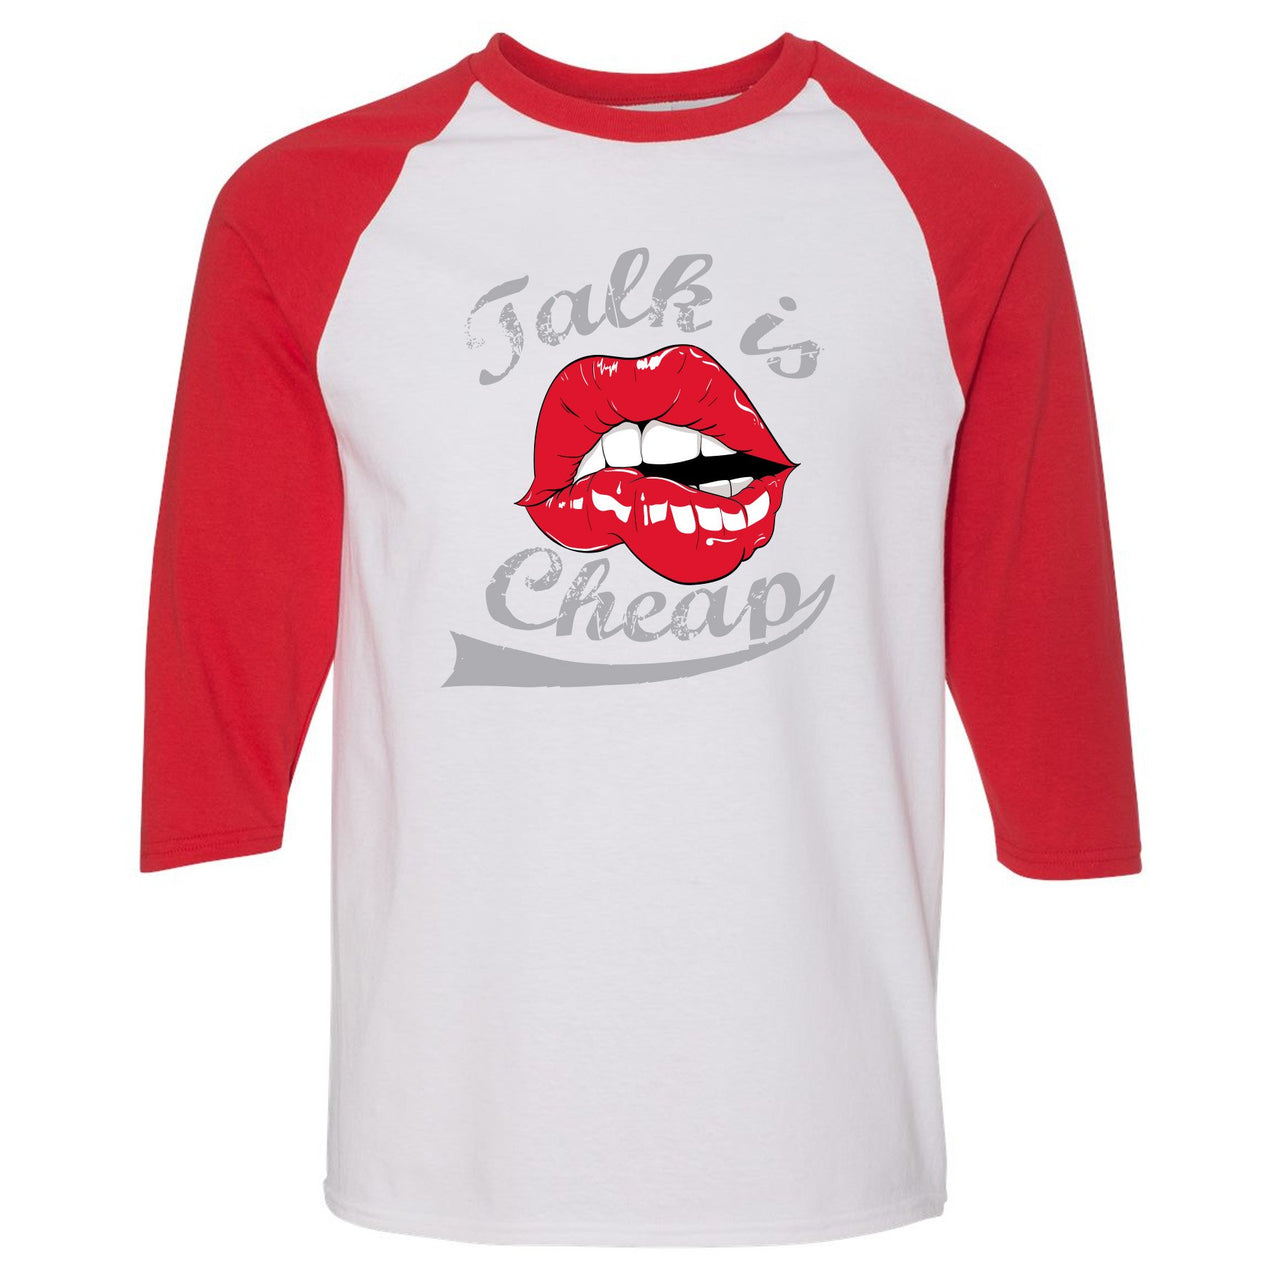 Reflections of a Champion 8s Raglan T Shirt | Talking Lips, White and Red